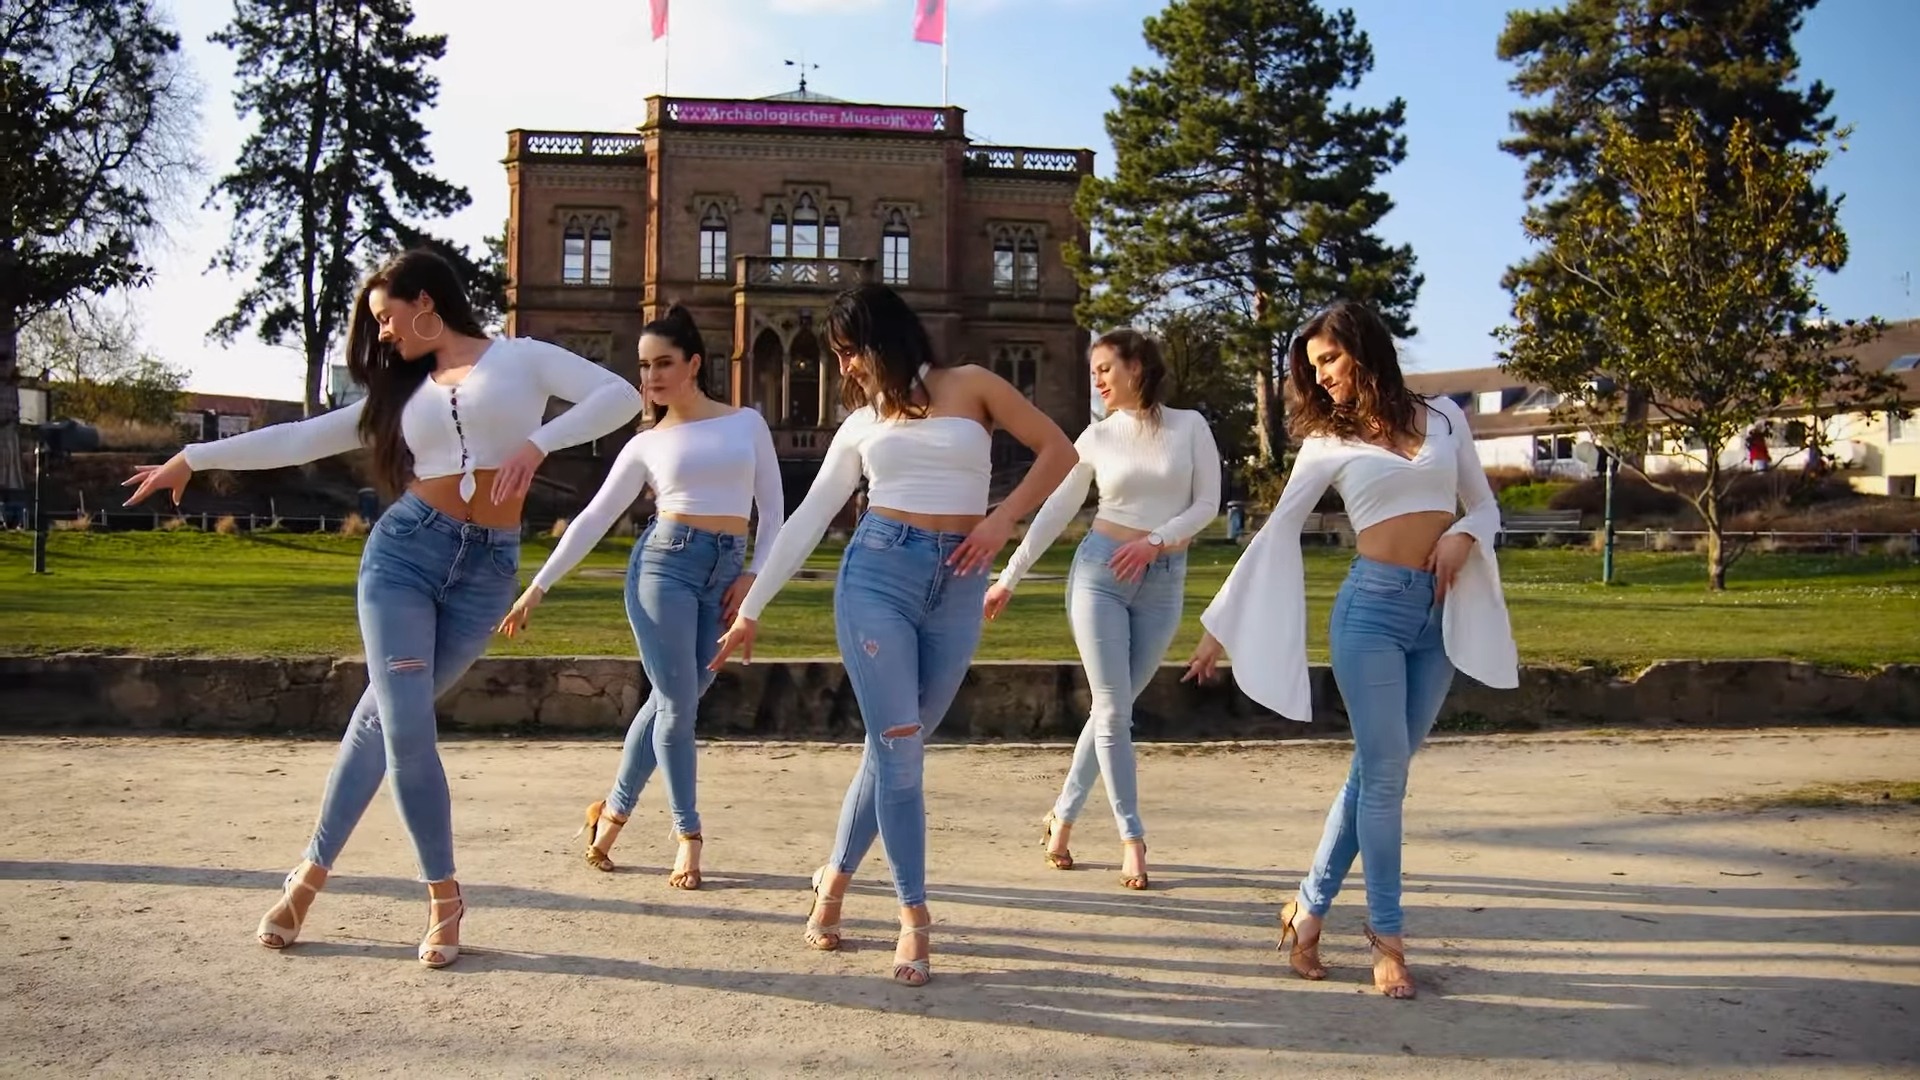 Five women in blue jeans and white top dancing Kizoba in front of a German castle